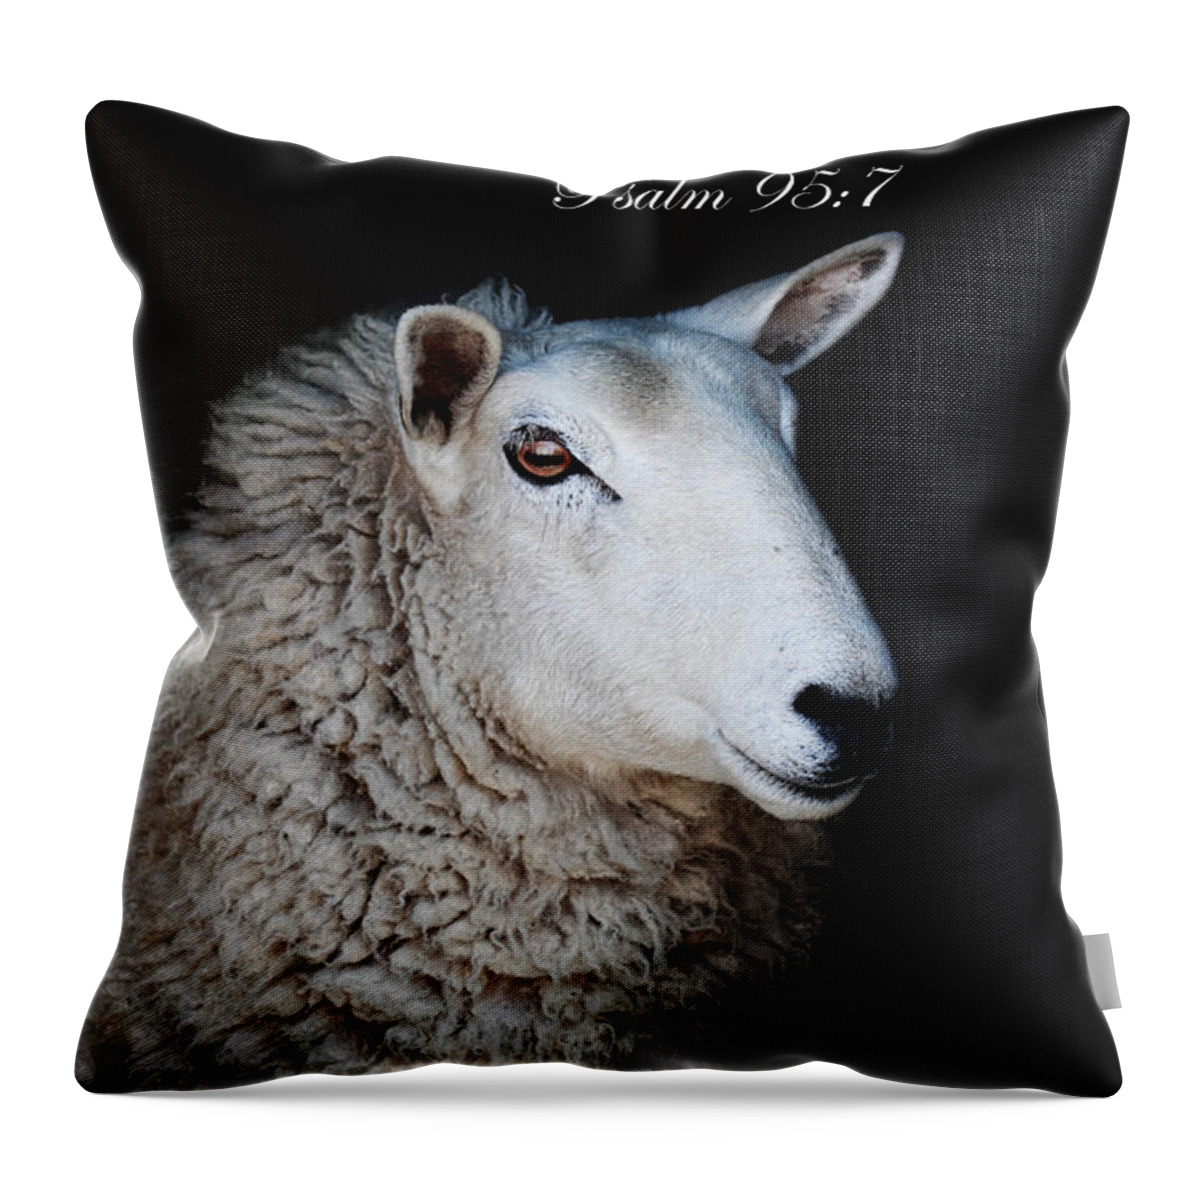 Profile Throw Pillow featuring the photograph The Sheep of His Hand by Stephanie Frey